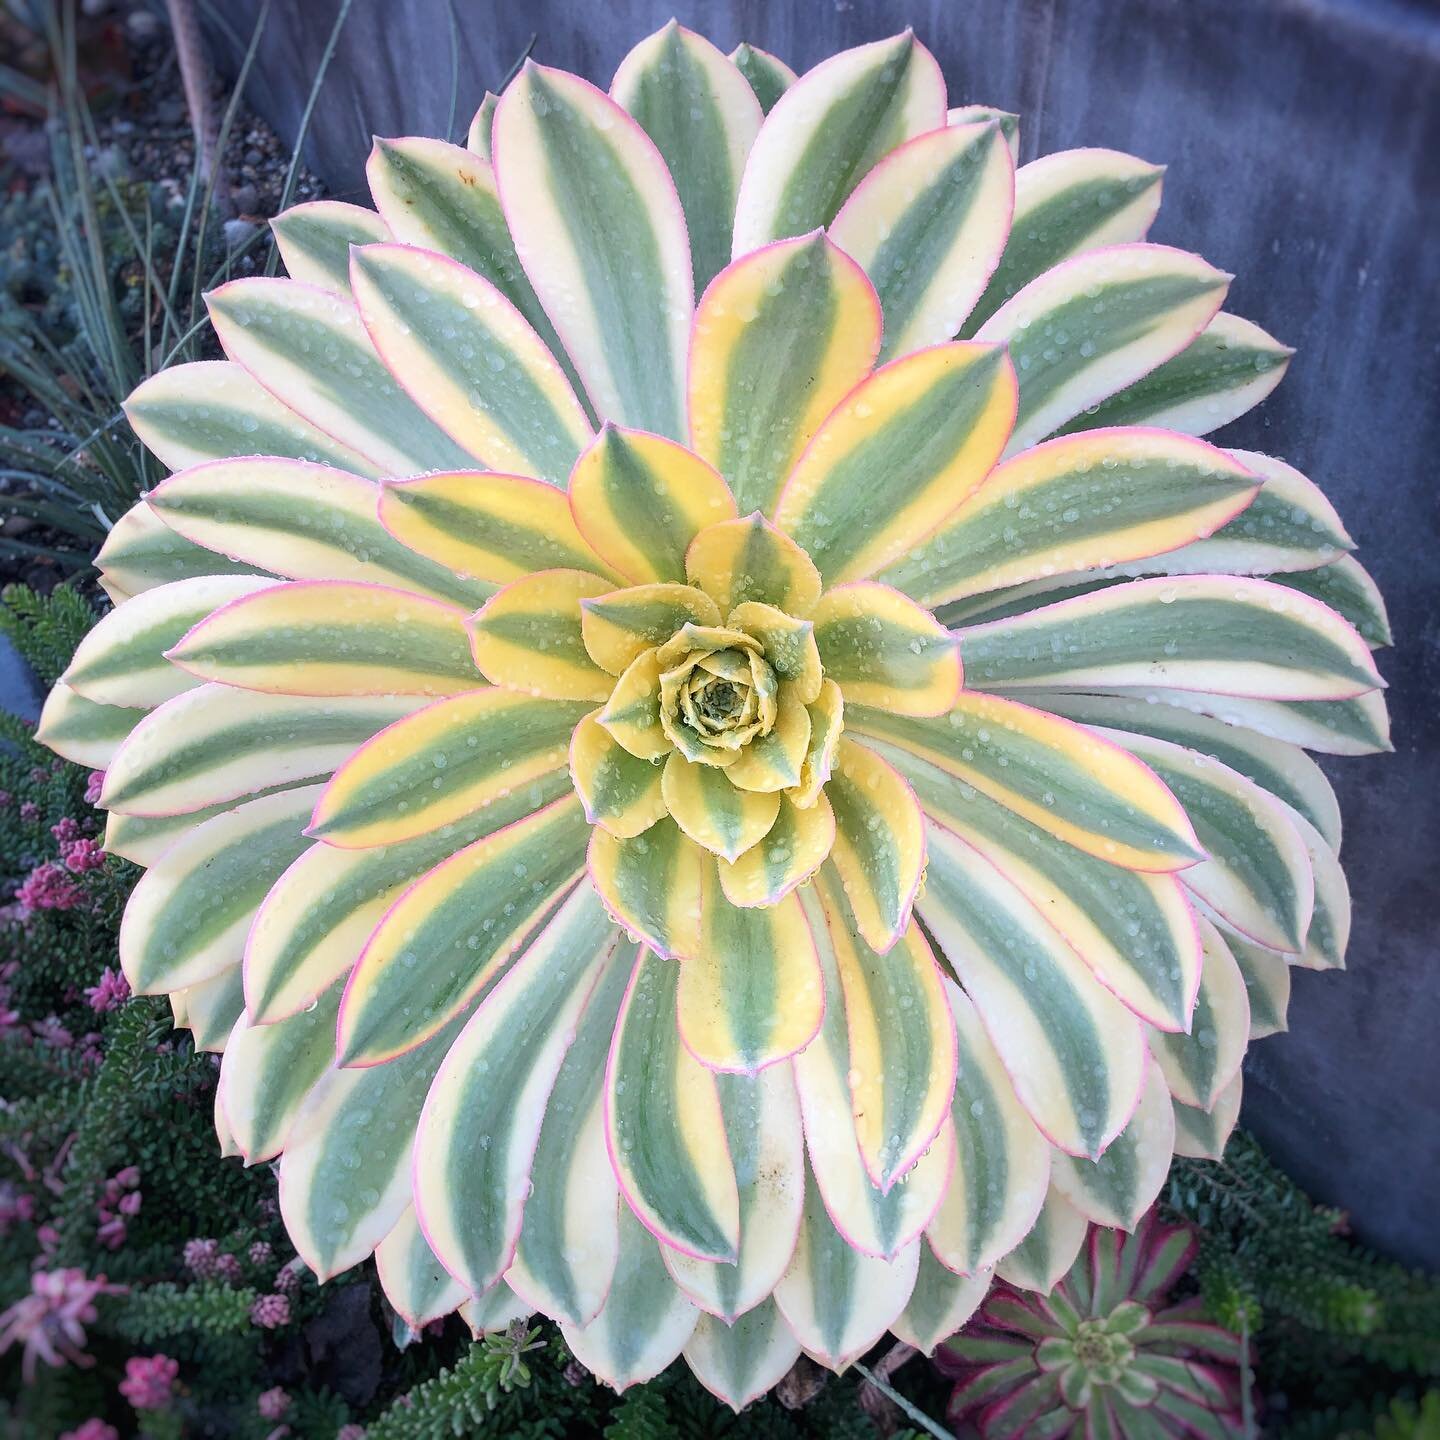 Aeonium &lsquo;Sunburst&rsquo; / Our namesake and one of our favorite plants for Coastal California gardens. 

We love this succulent because it gives year-round color and brightness, bringing a little burst of sunshine to your yard even on those dam